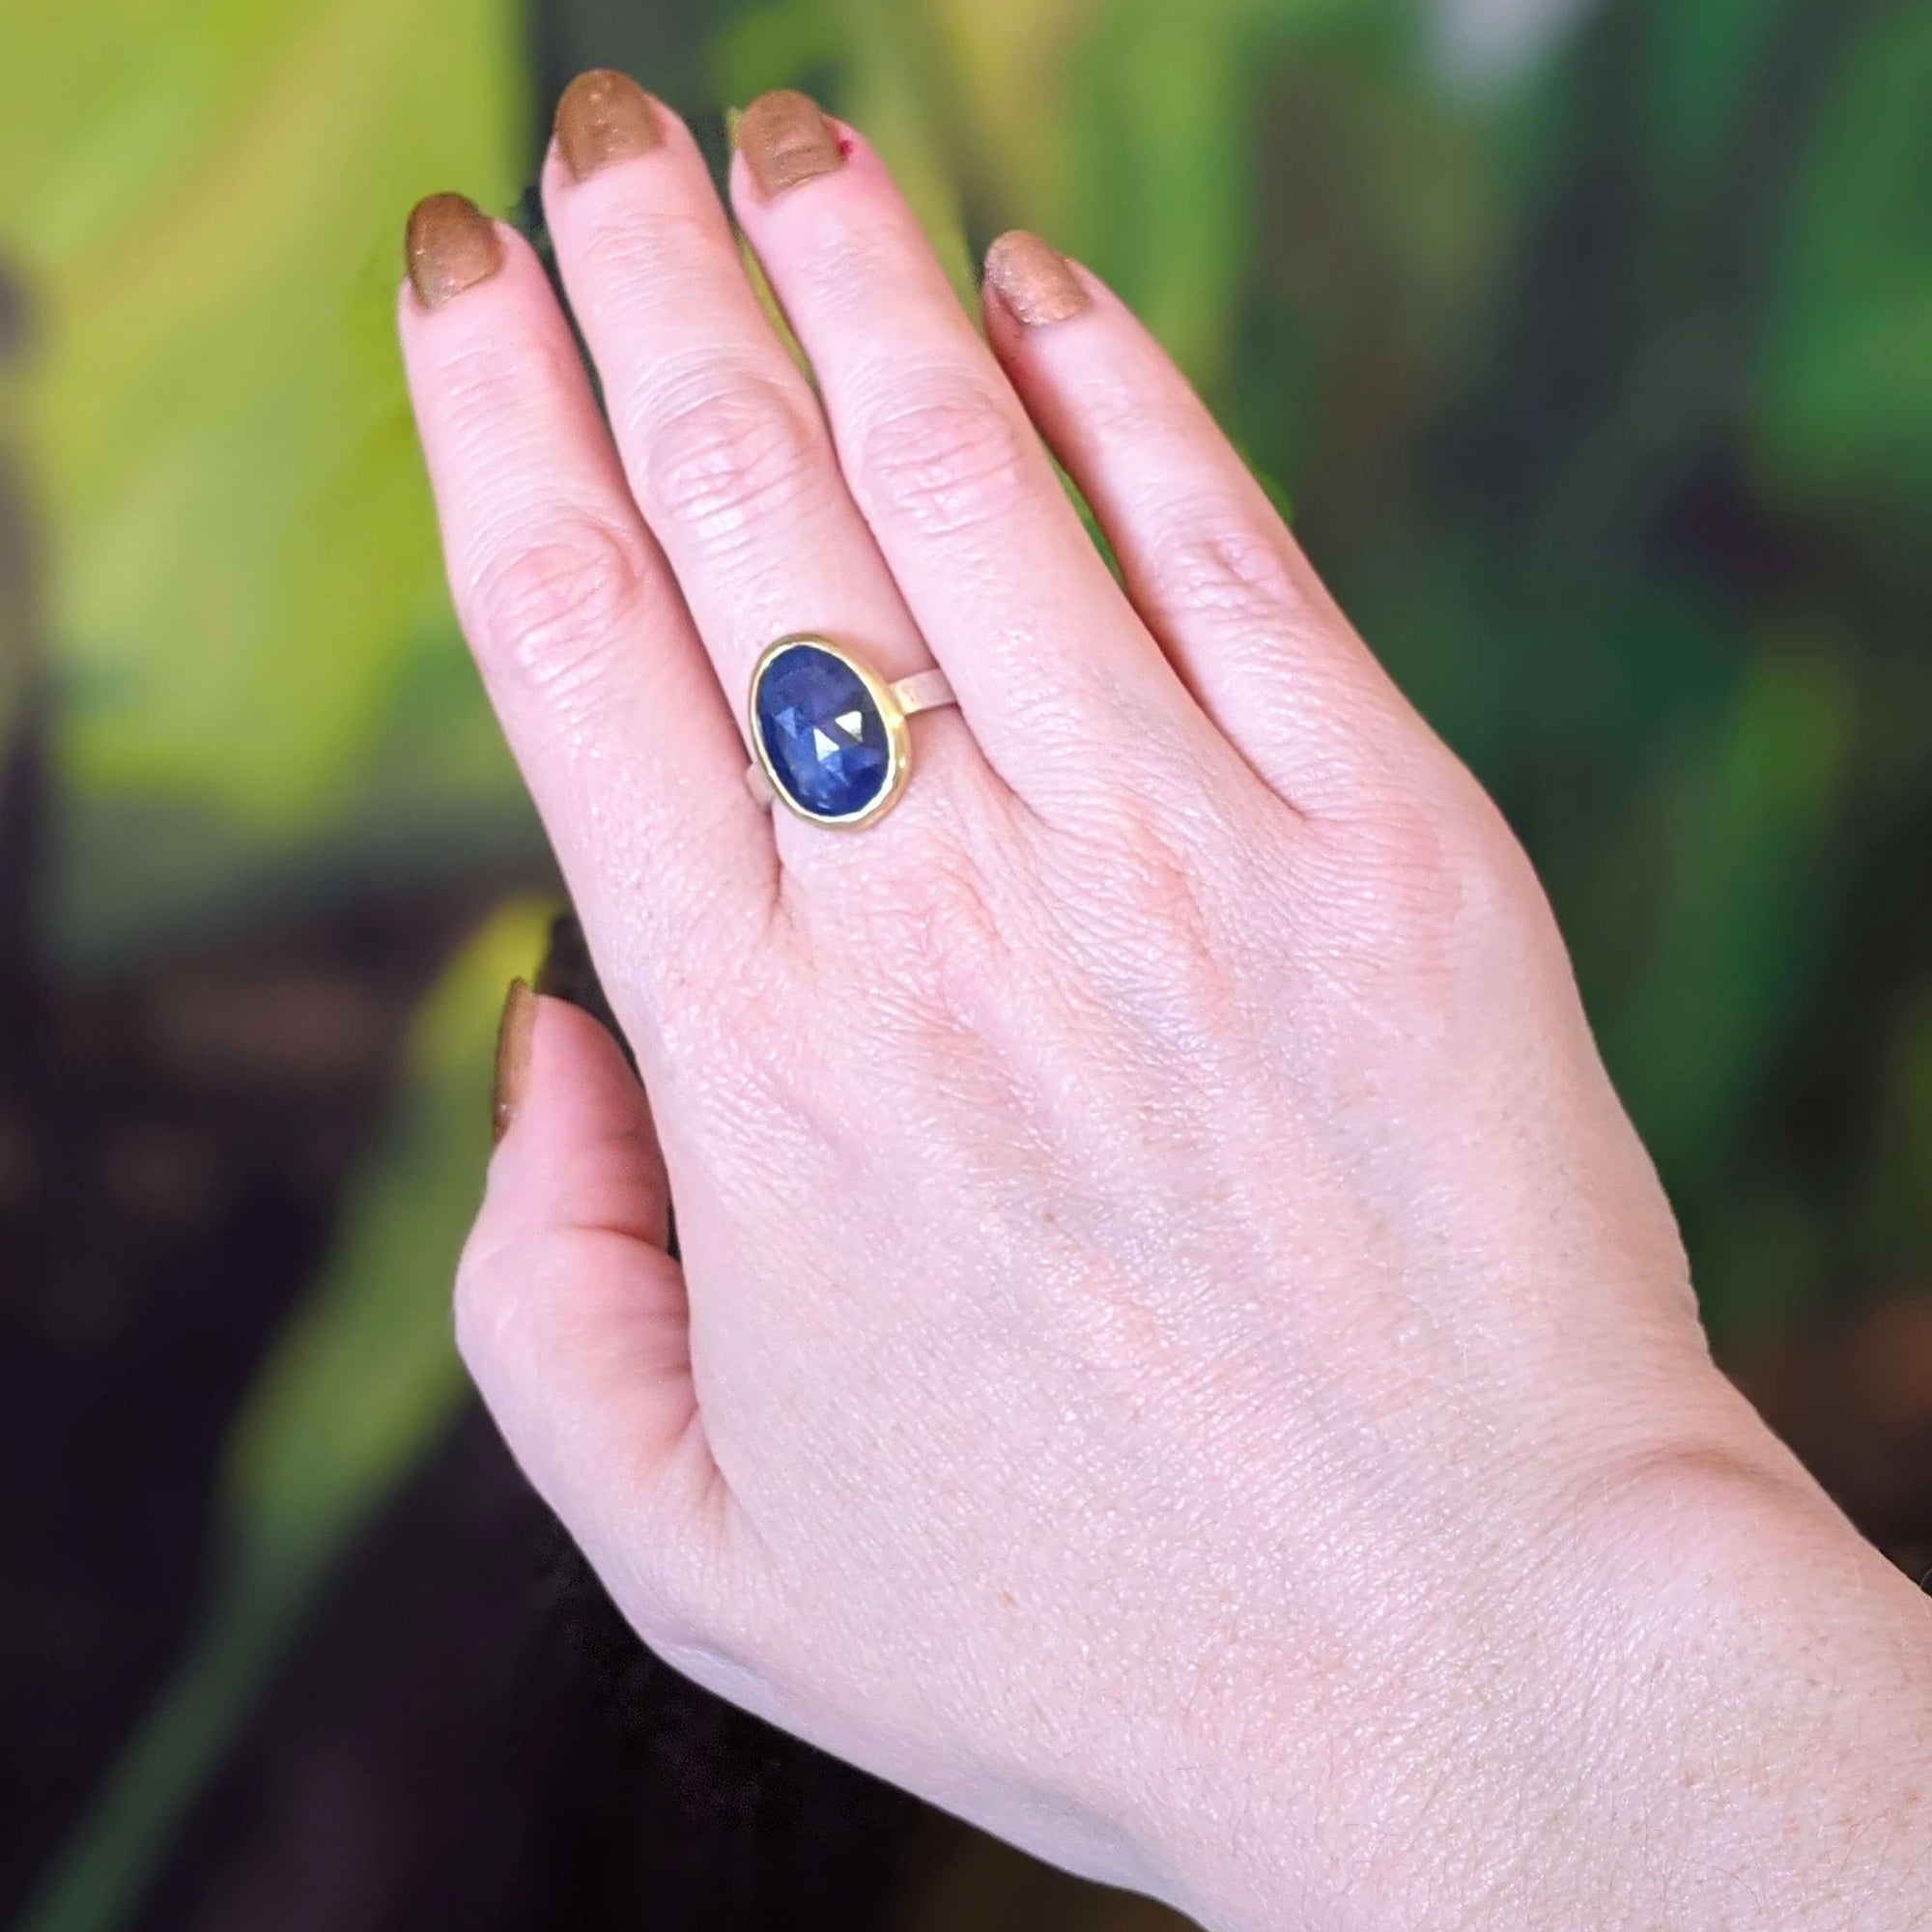 Blue rose cut sapphire ring in yellow gold and hammered sterling silver. Handmade with recycled metal and conflict-free stone. Design and created at EC Design Studio in Minneapolis, MN.